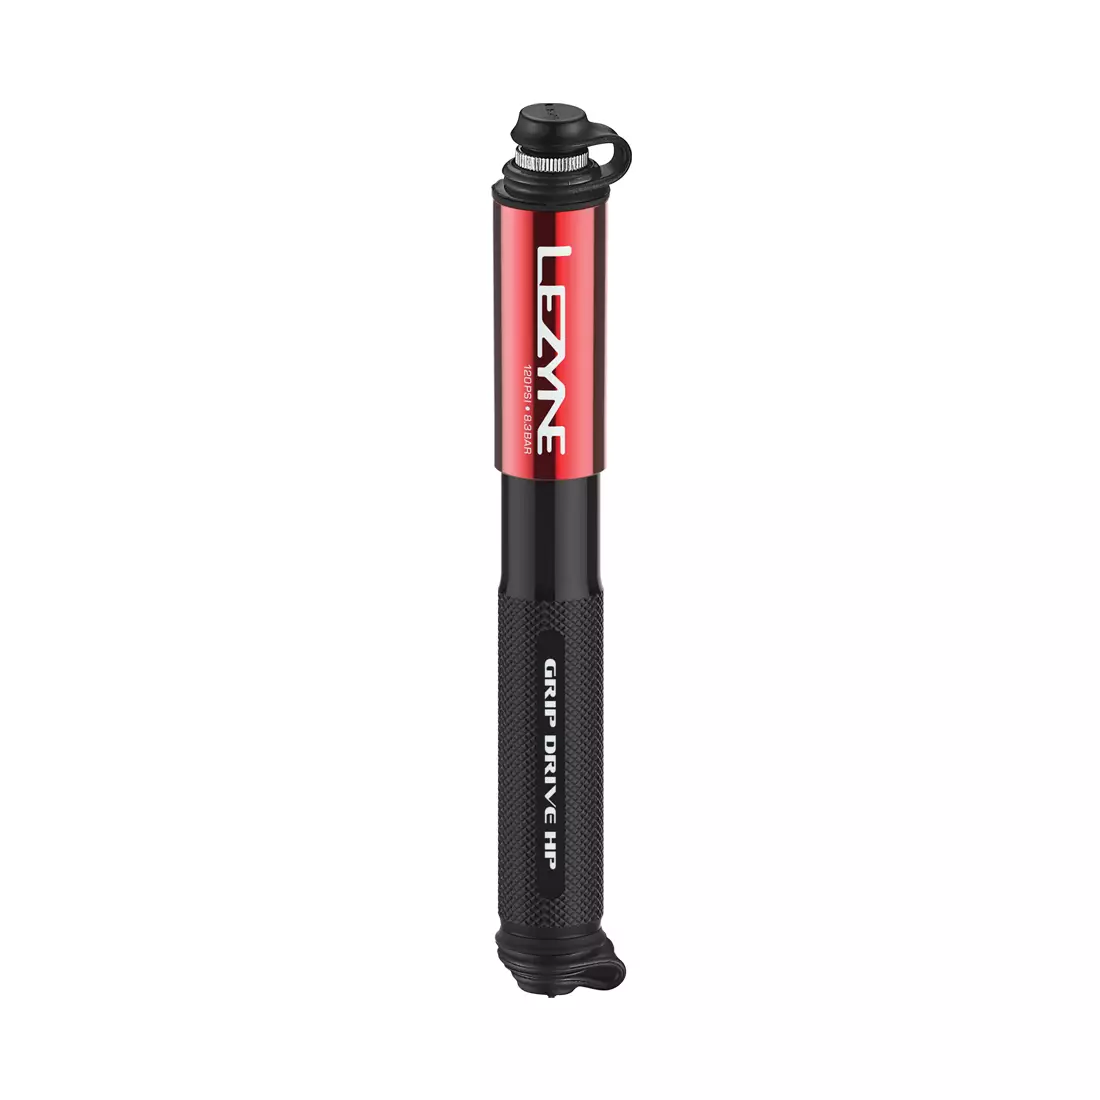 LEZYNE hand bicycle pump GRIP DRIVE HP S 120psi 185mm red LZN-1-MP-GRIPHP-V1S11